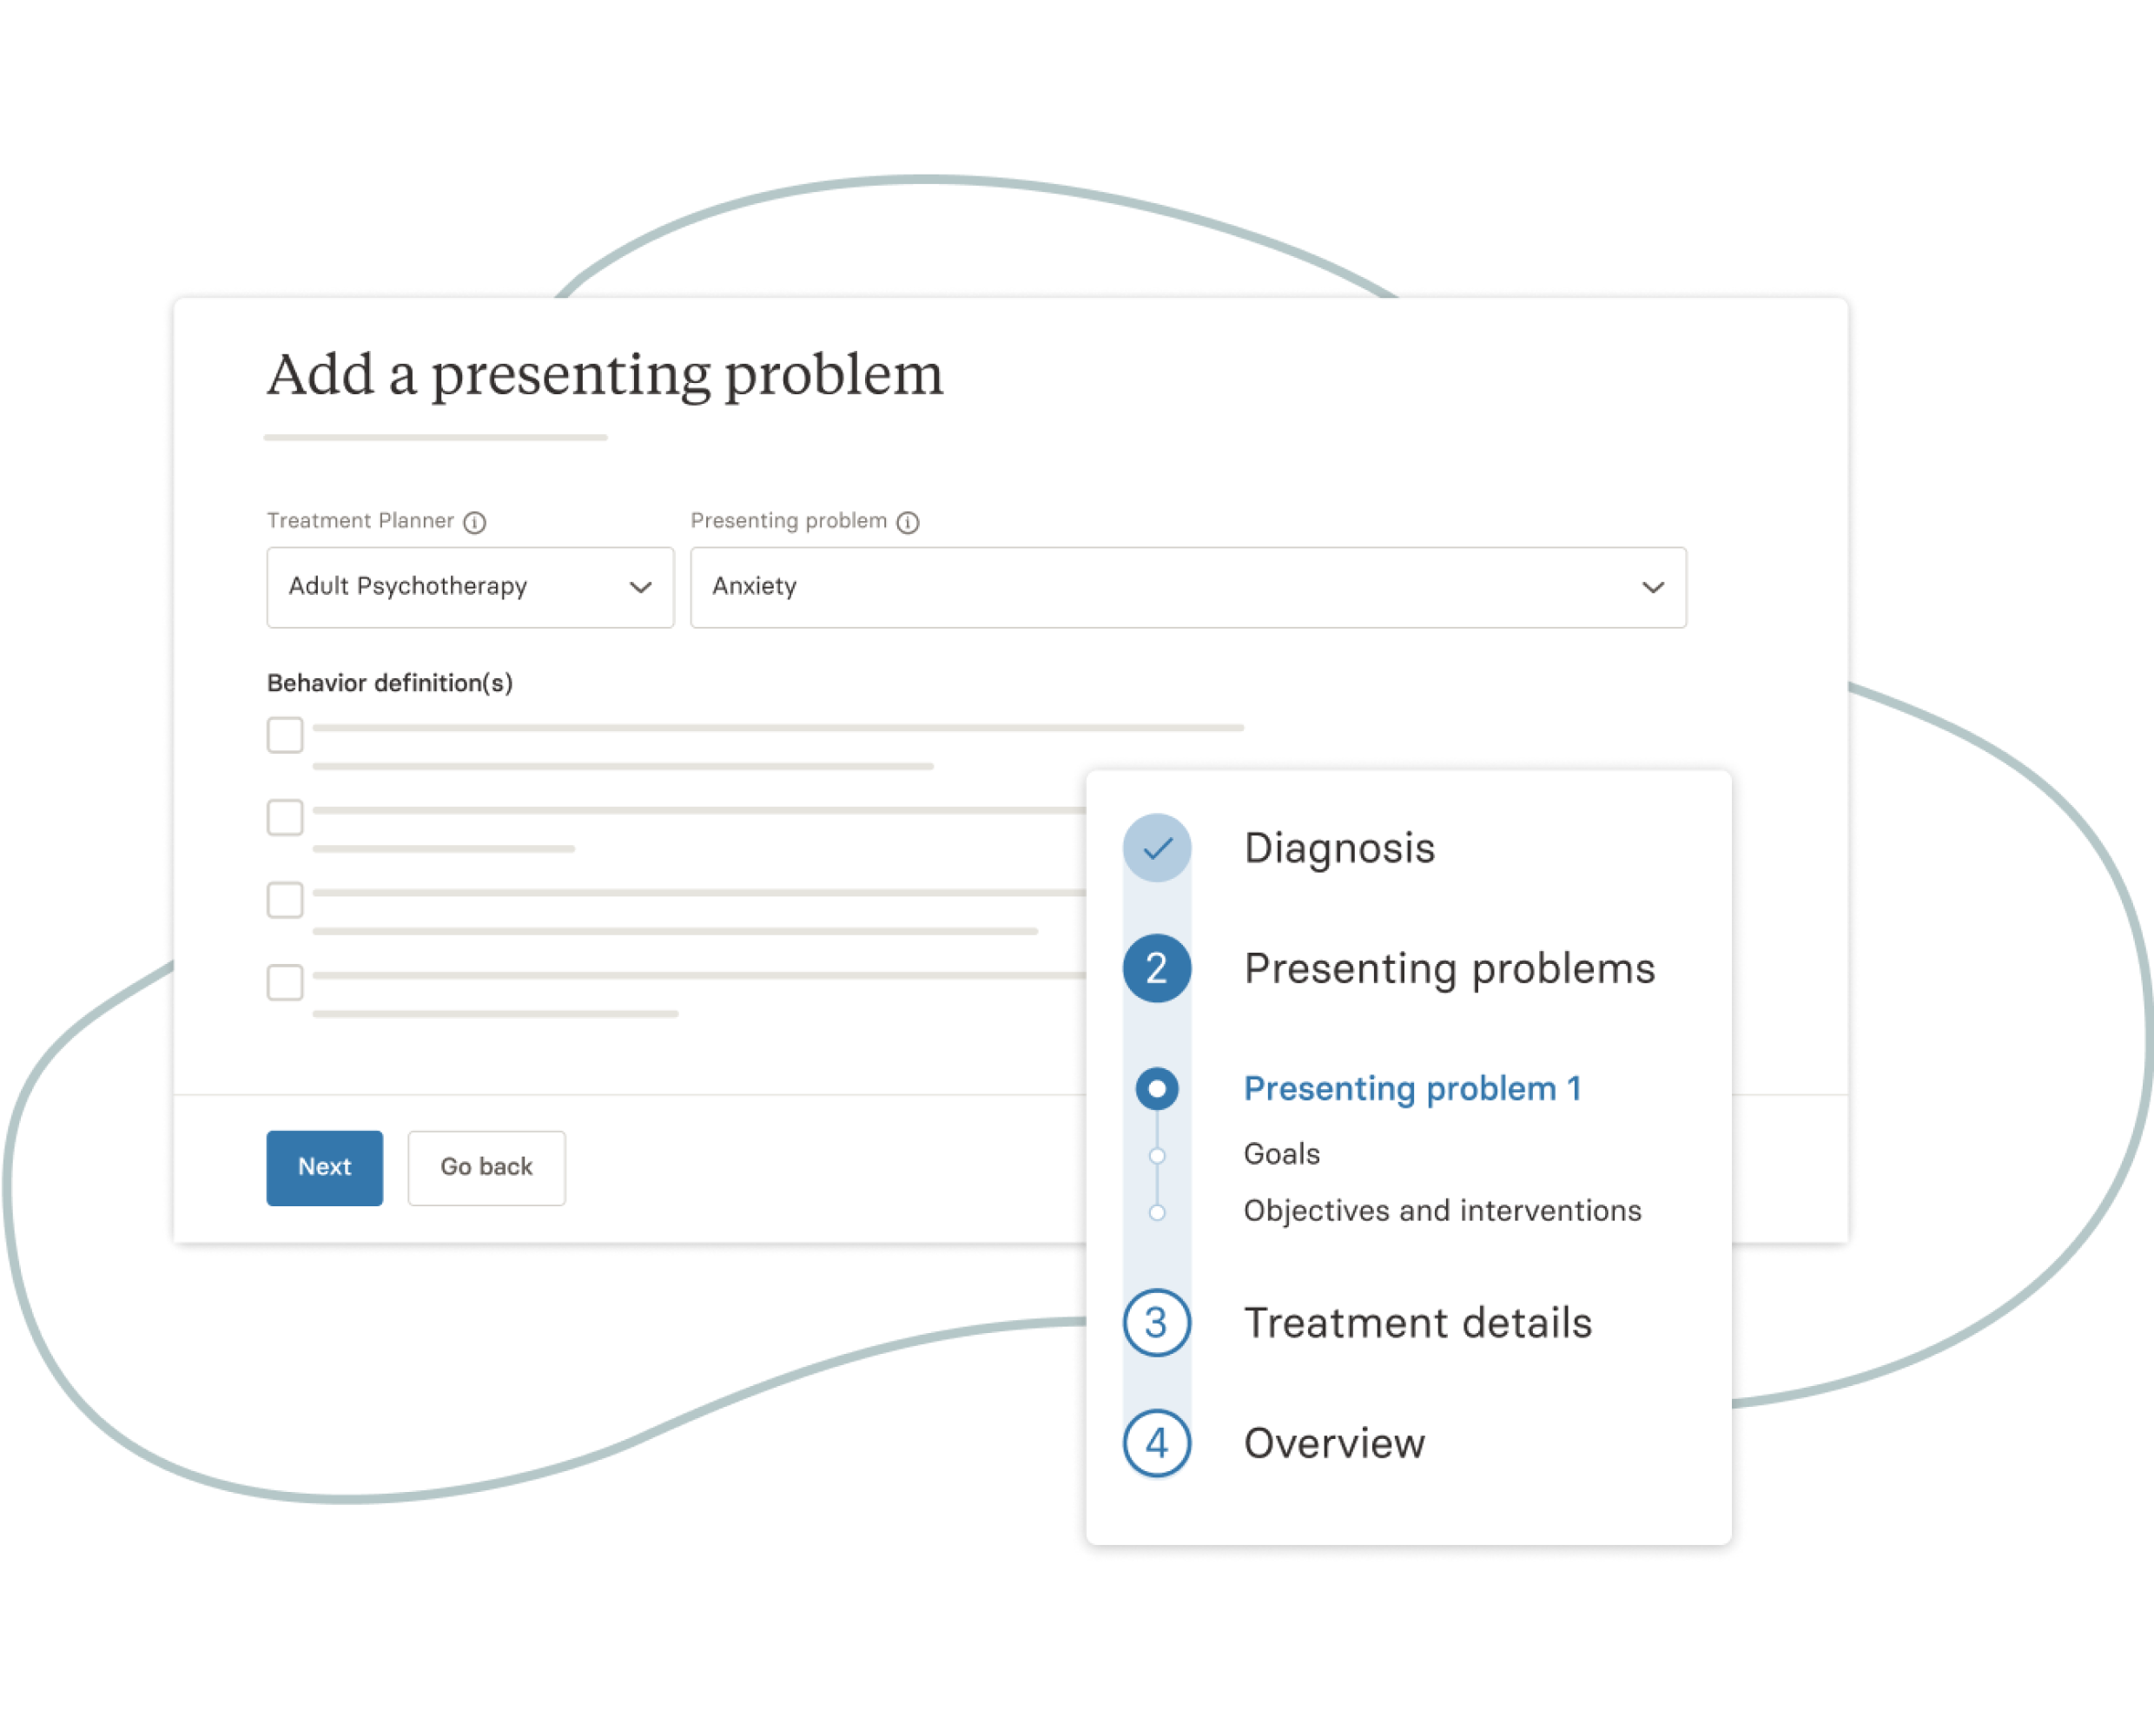 Product screenshot featuring the "add a presenting problem" of the Wiley treatment planner.